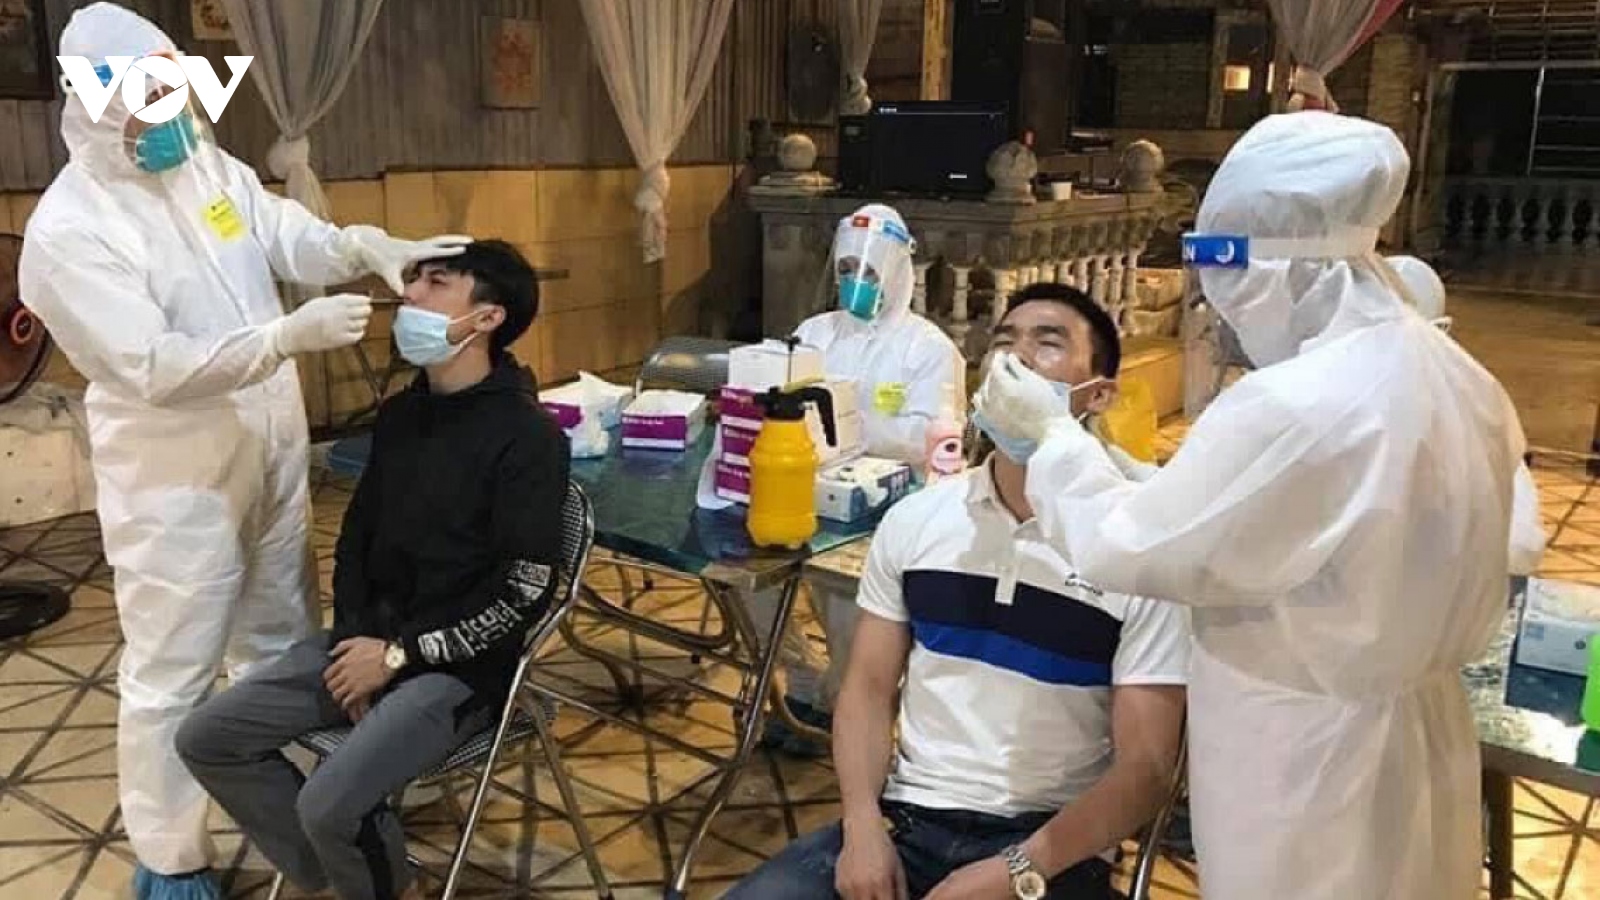 25 COVID-19 patients turn critical in Bac Ninh hotspot